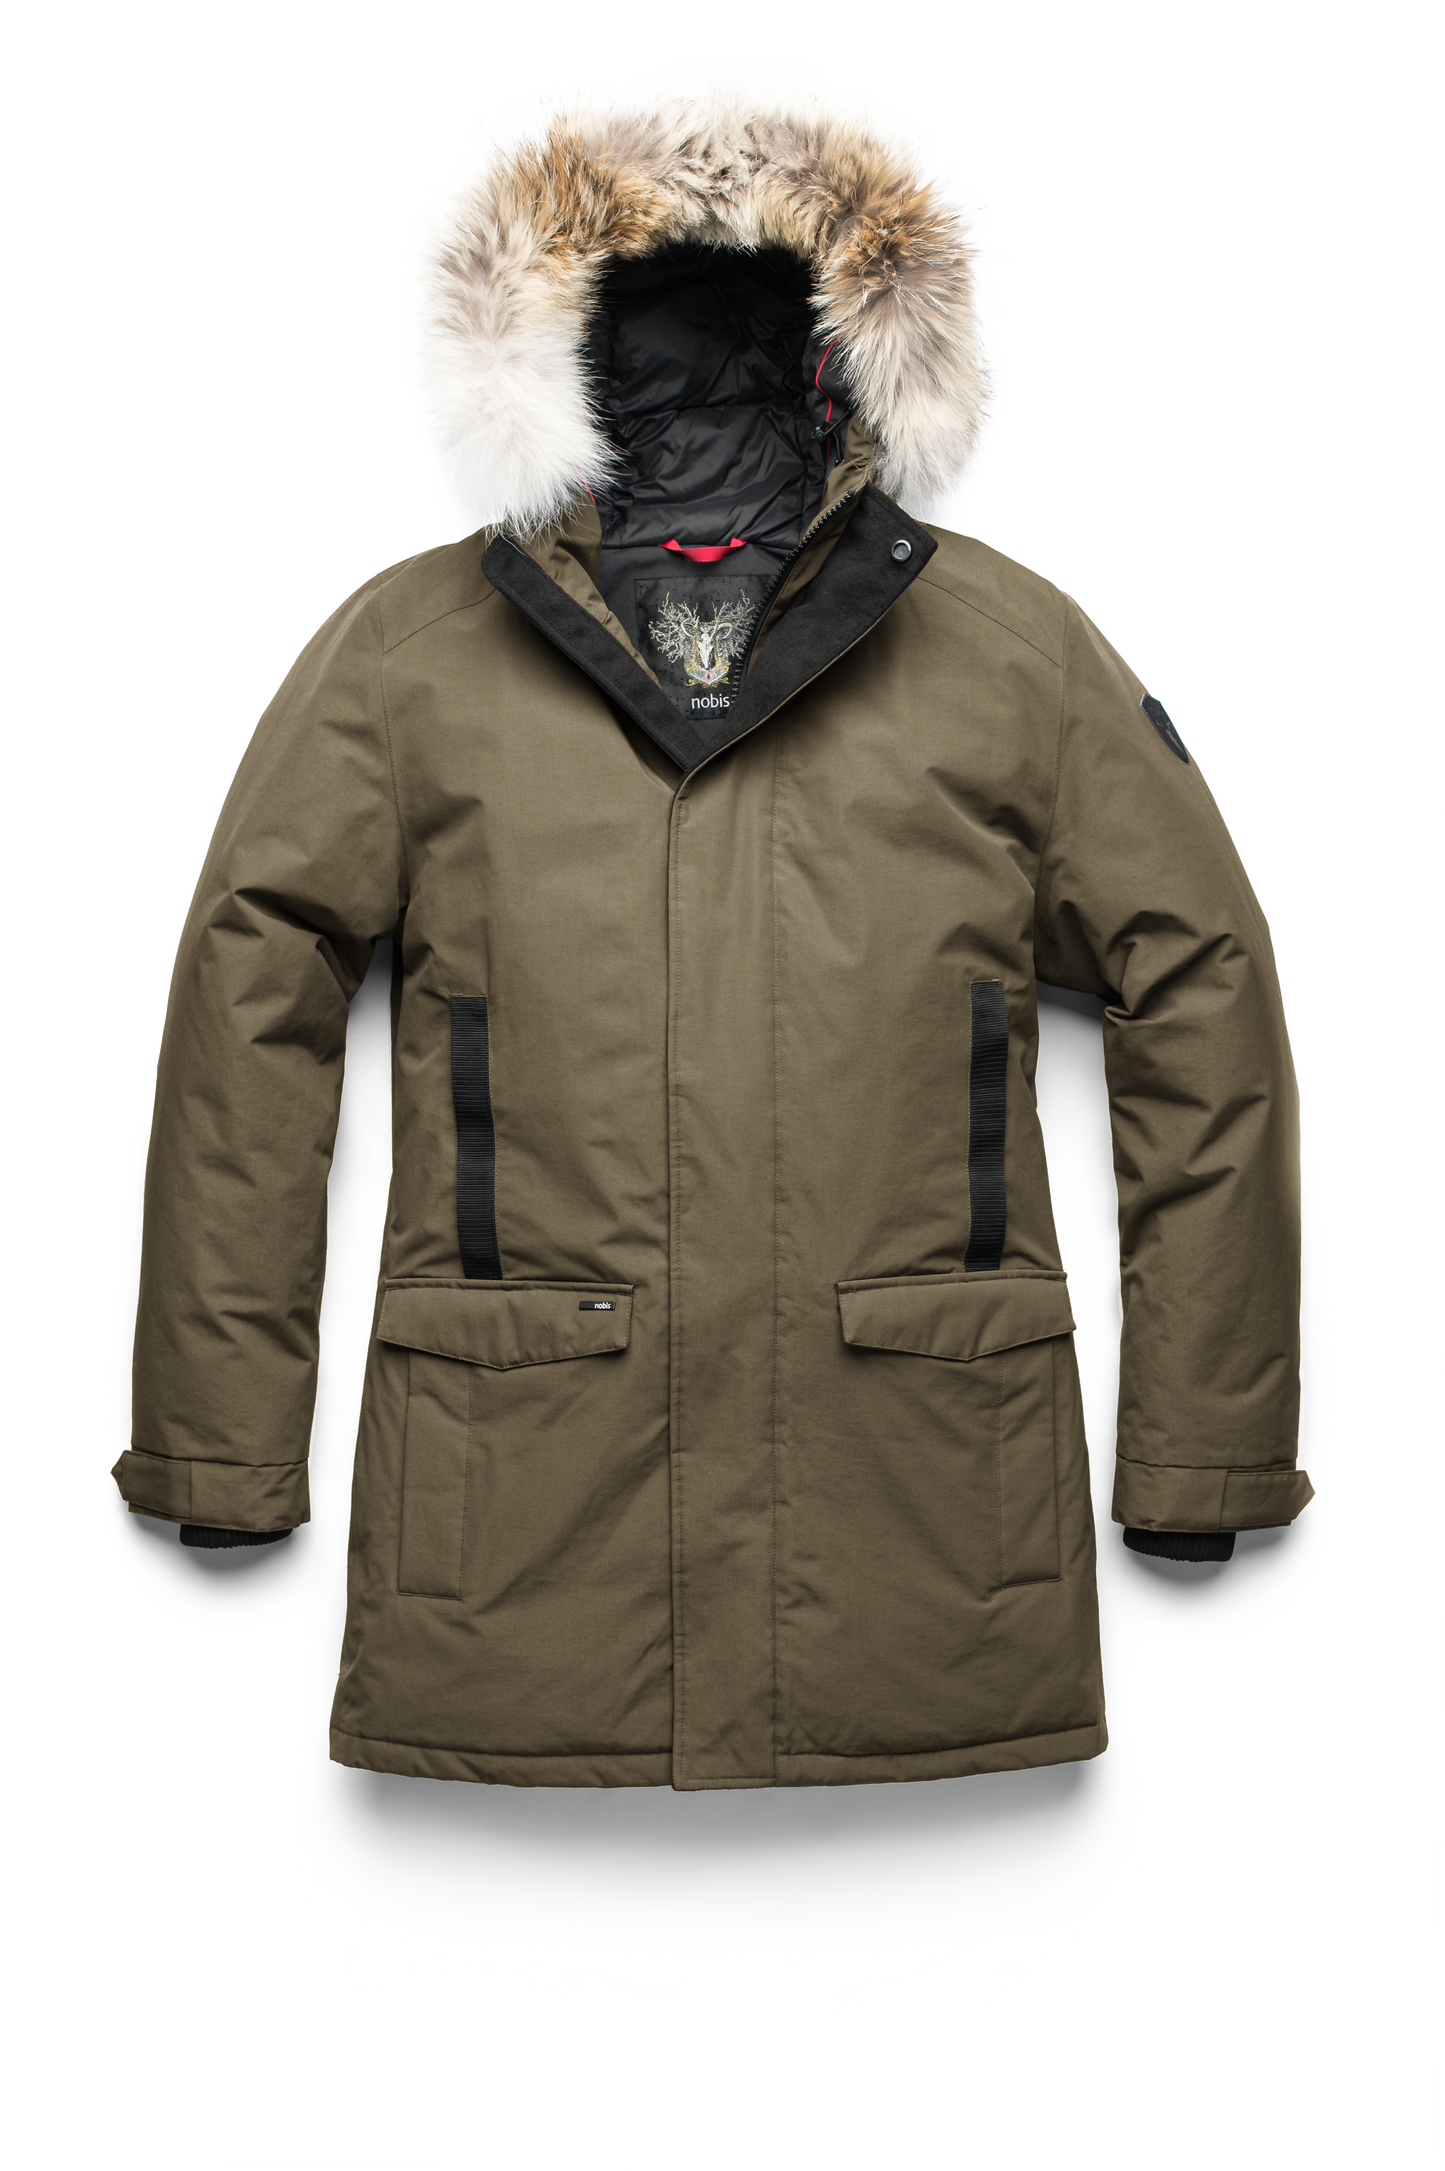 Lightweight men's parka with duck down fill and removable fur trim around the hood in Fatigue